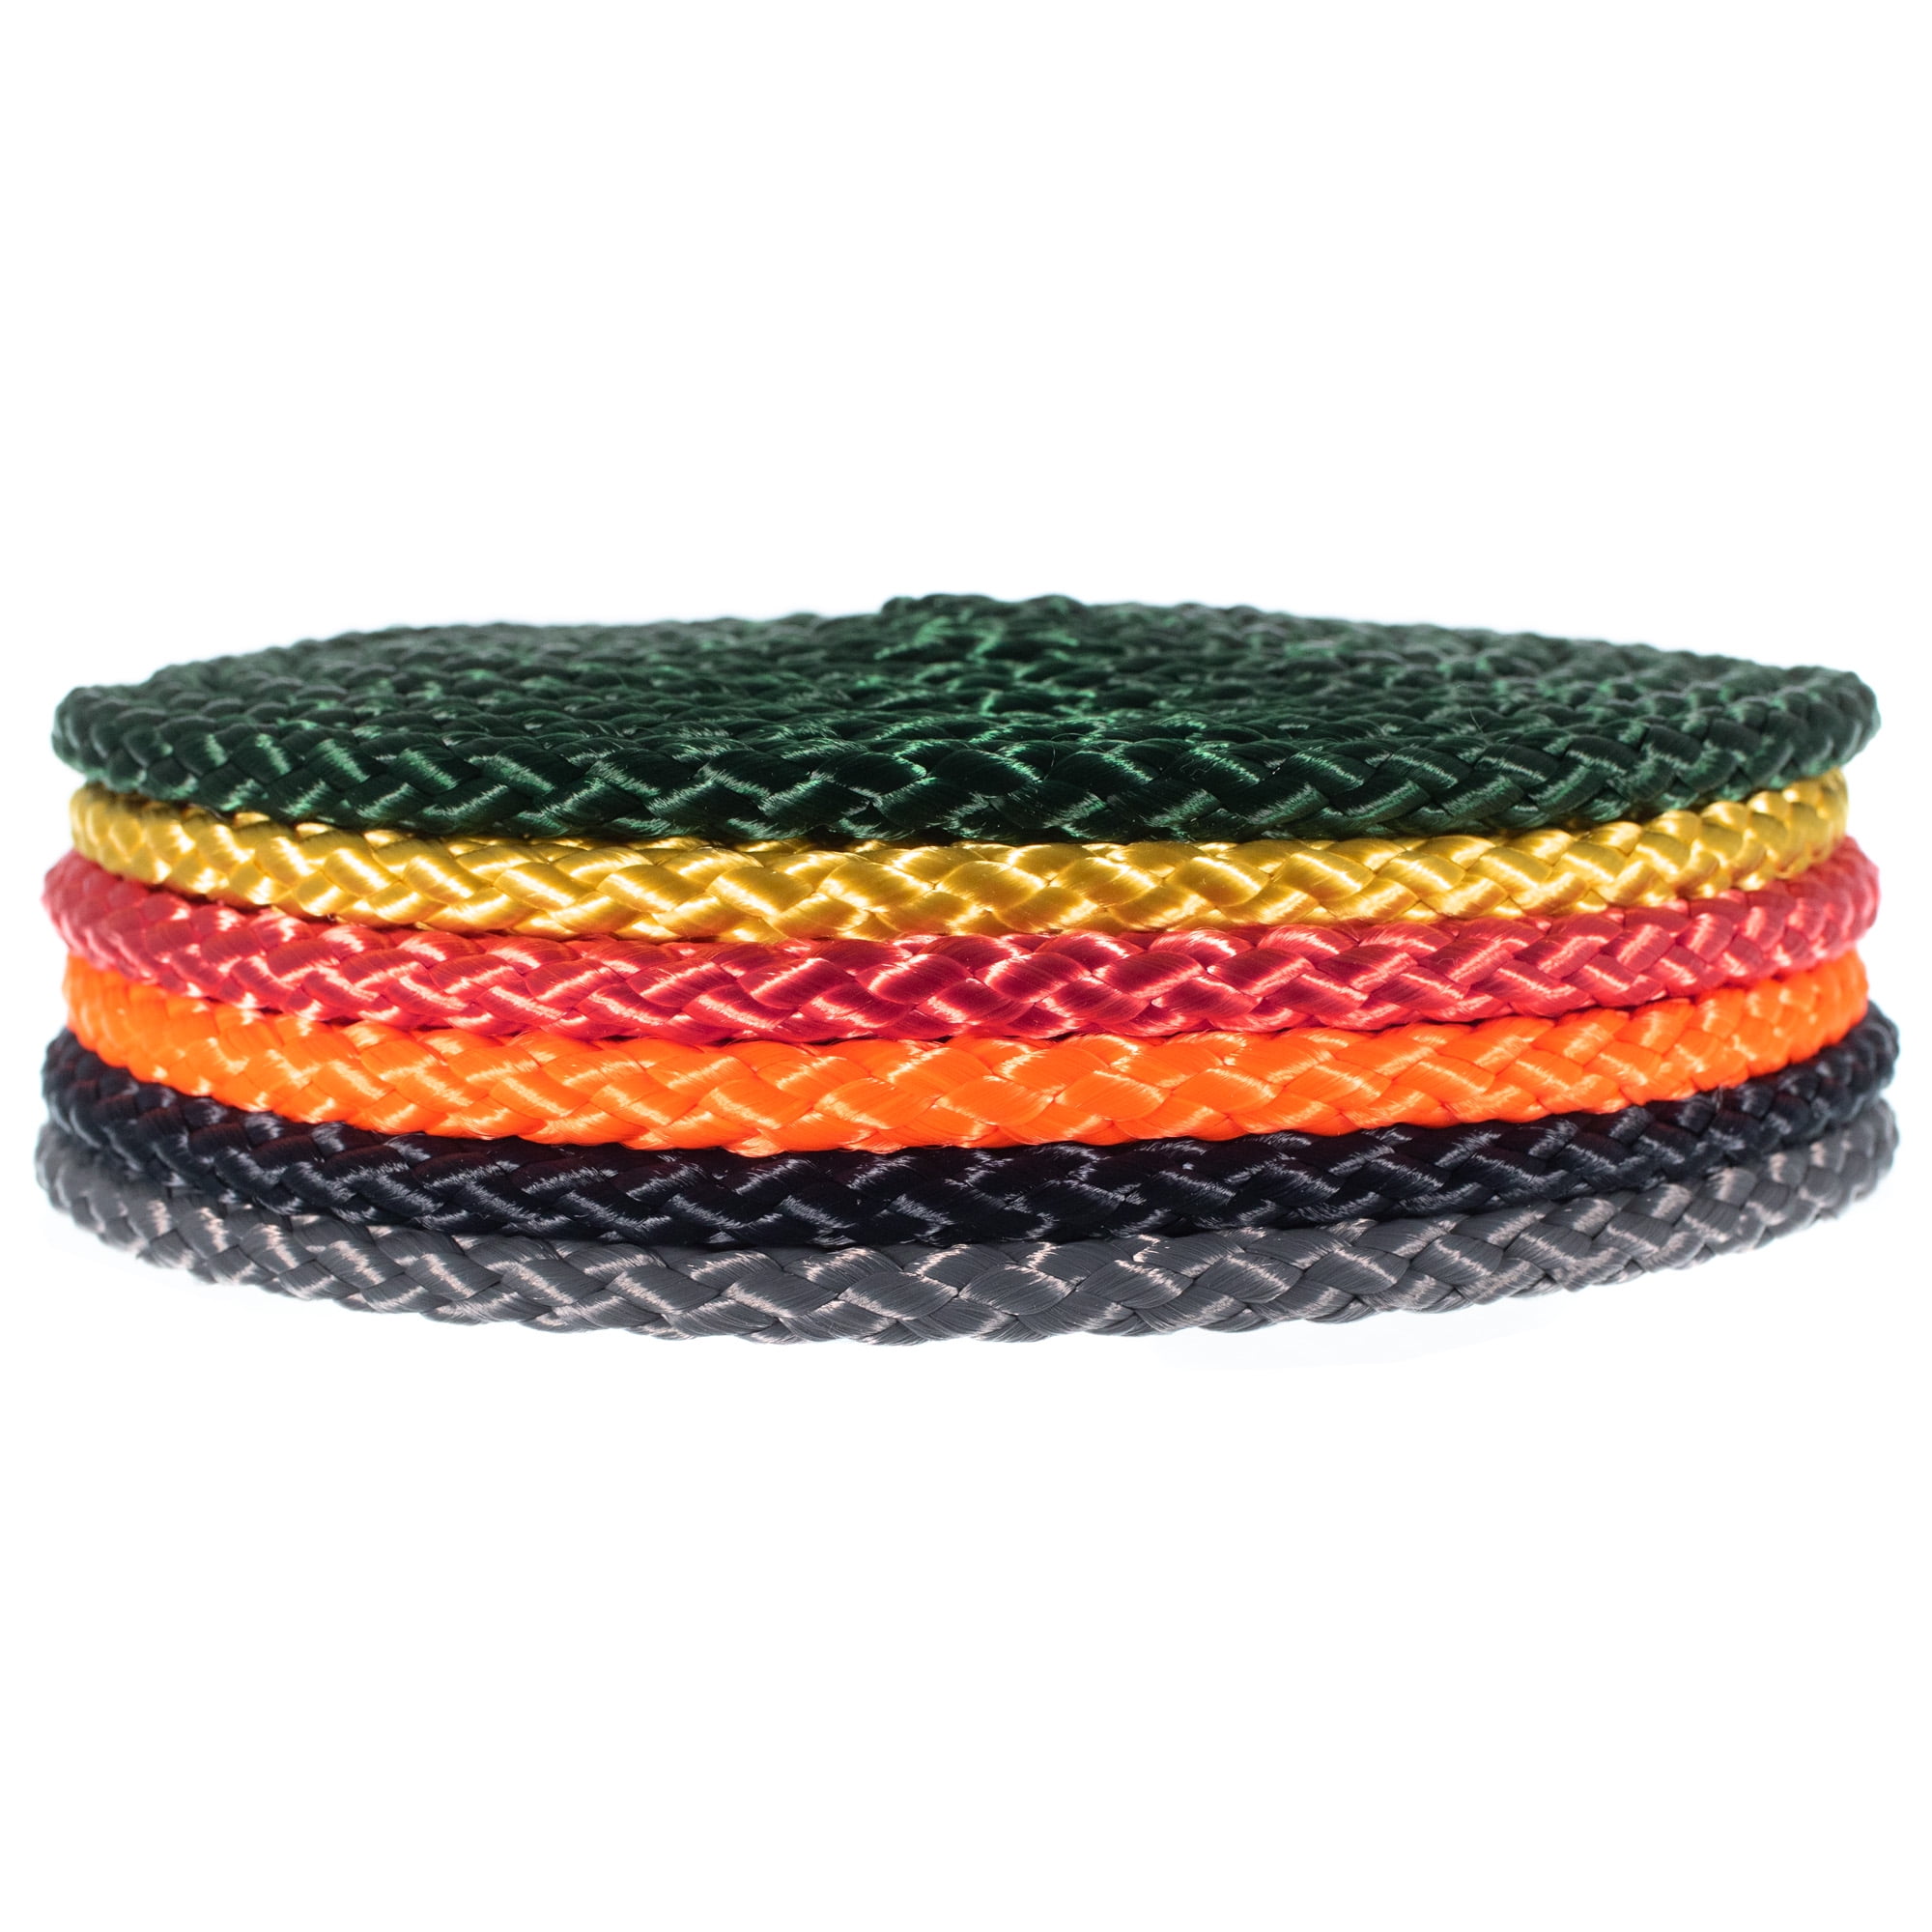 GOLBERG Diamond Braid Nylon Rope All Purpose Use for The Toughest of Environments and Tasks Strong and Durable with Shock Absorption and Stretch 